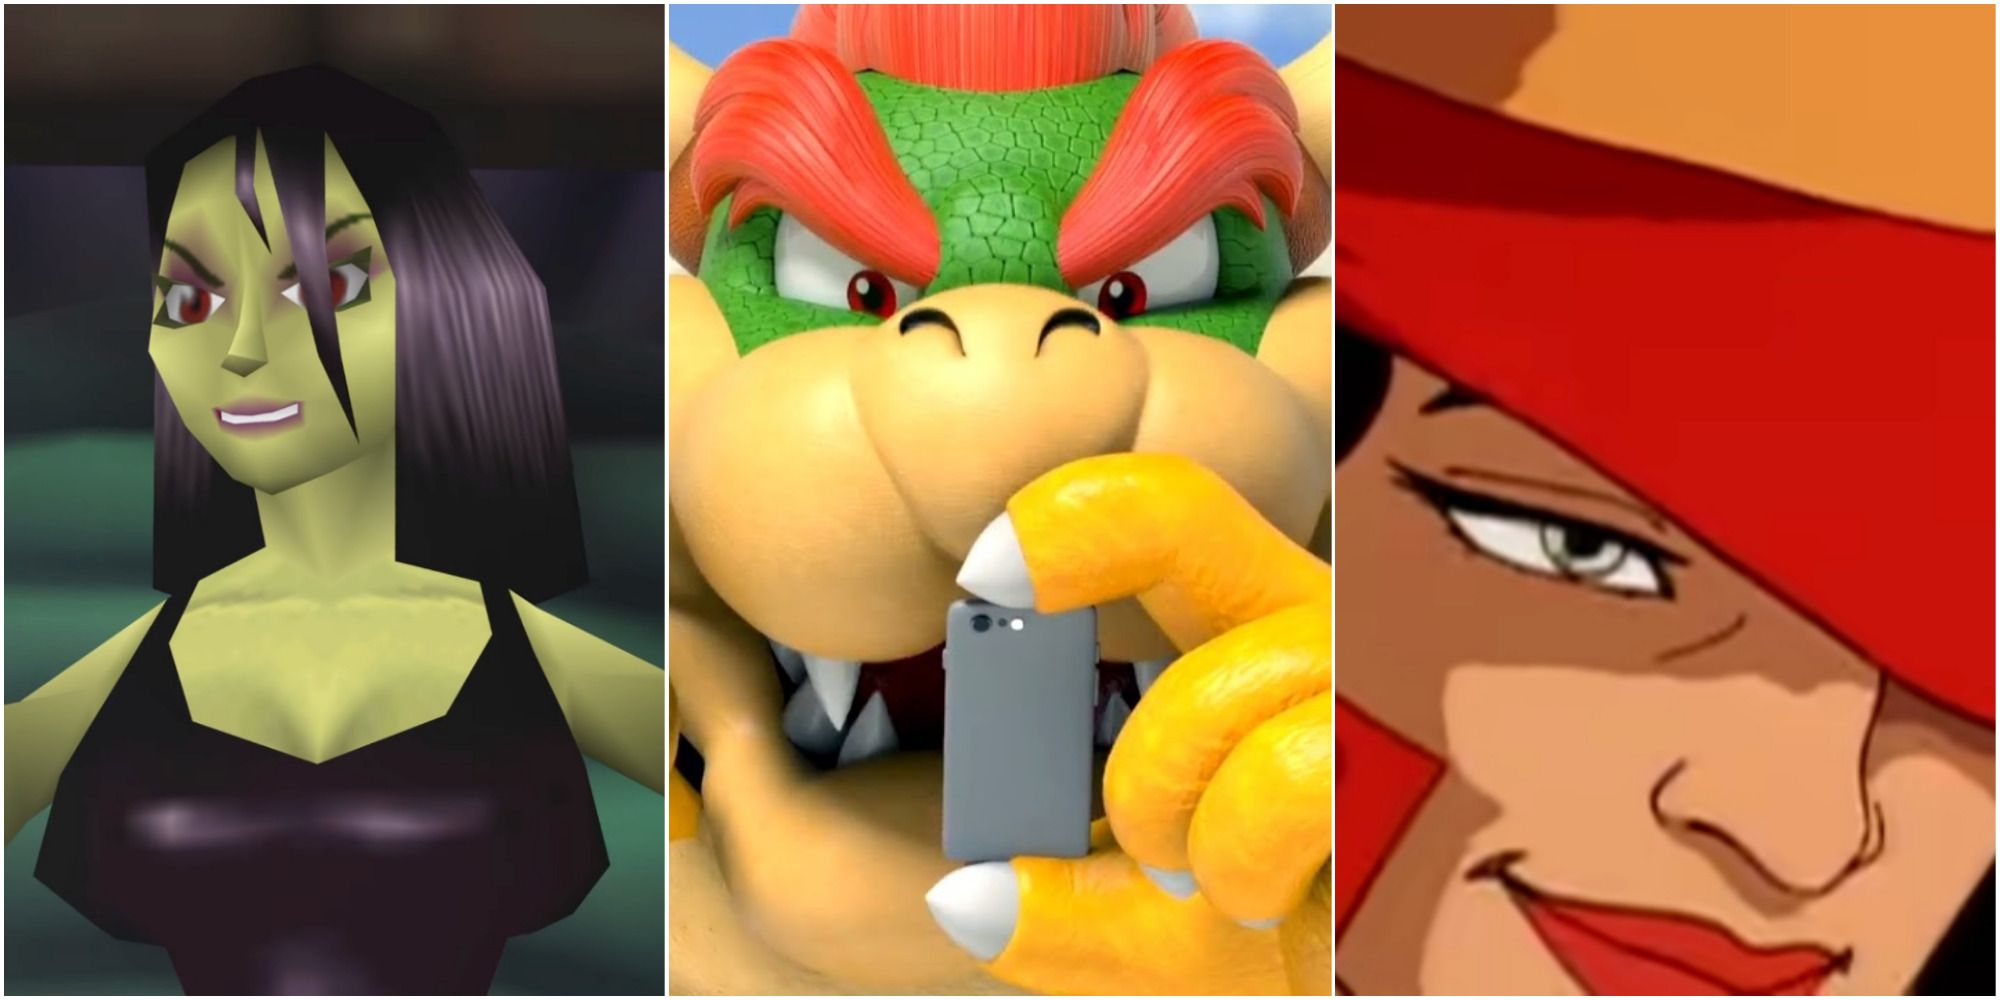 A collage of images, showing Gruntilda being hot, Bowser taking a selfie, and Carmen Sandiego smiling mysteriously